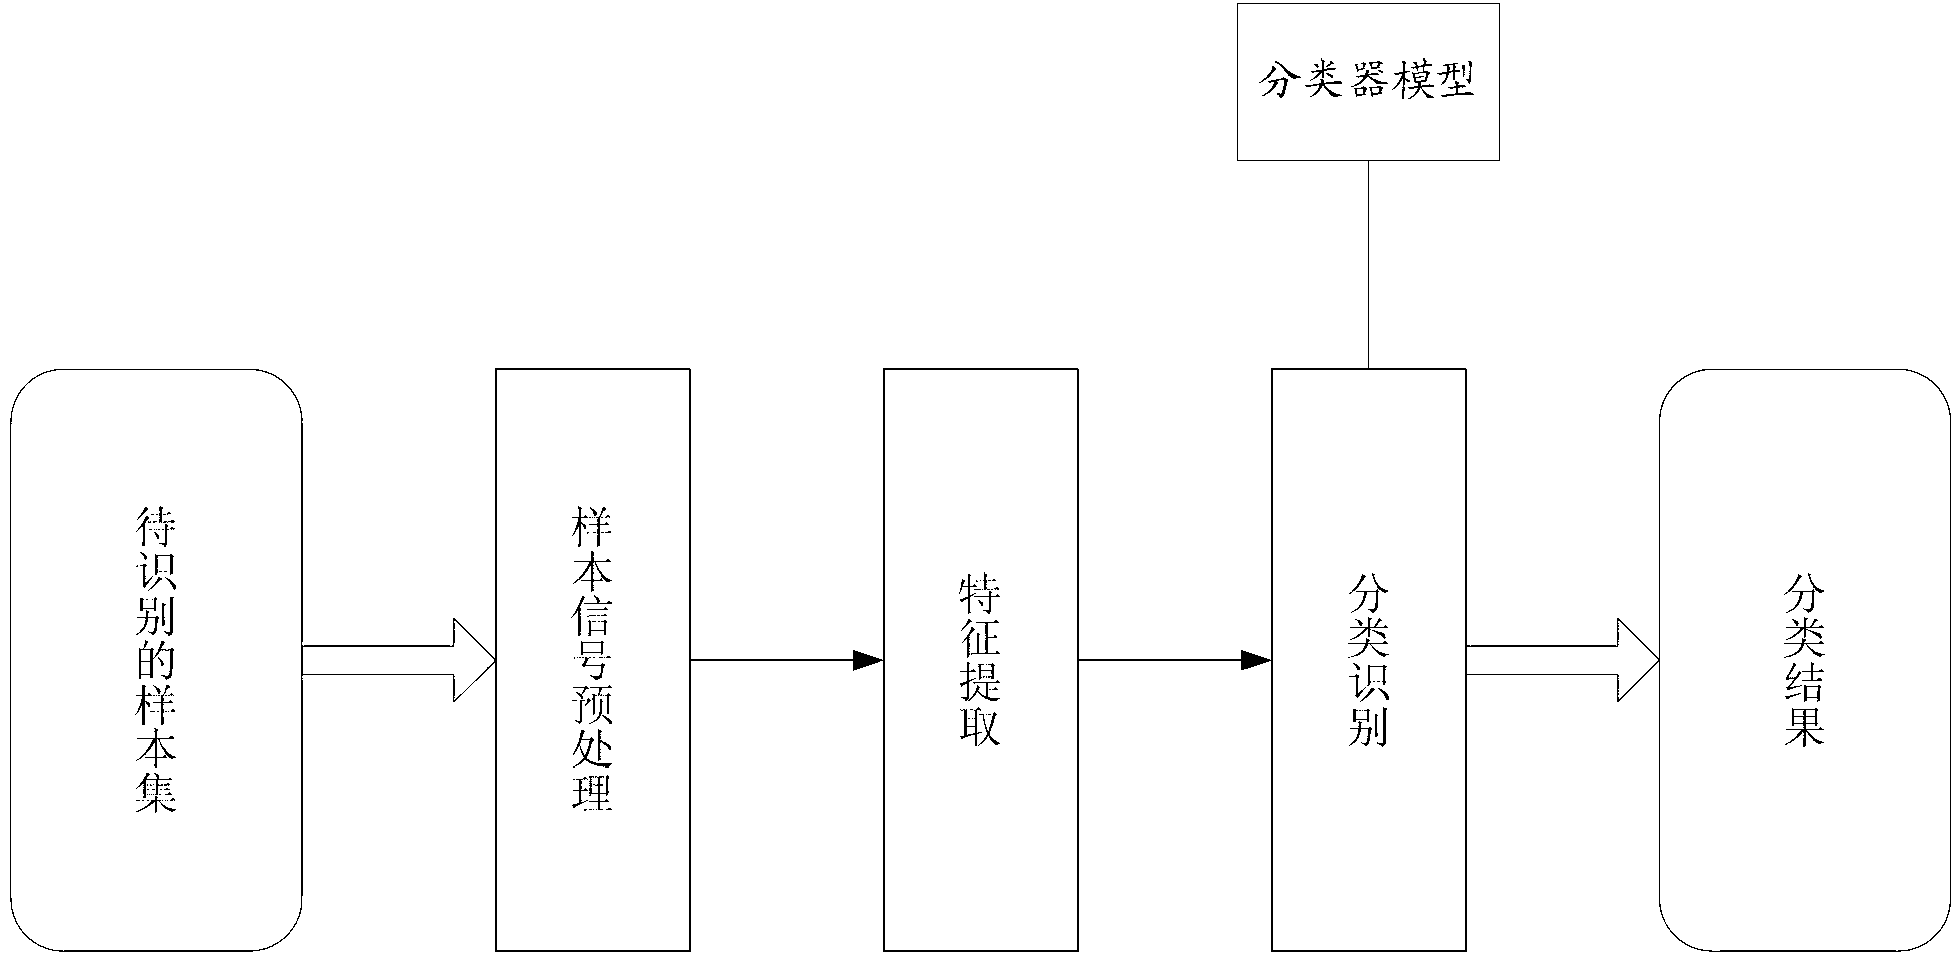 Method and system for identifying and classifying paper money